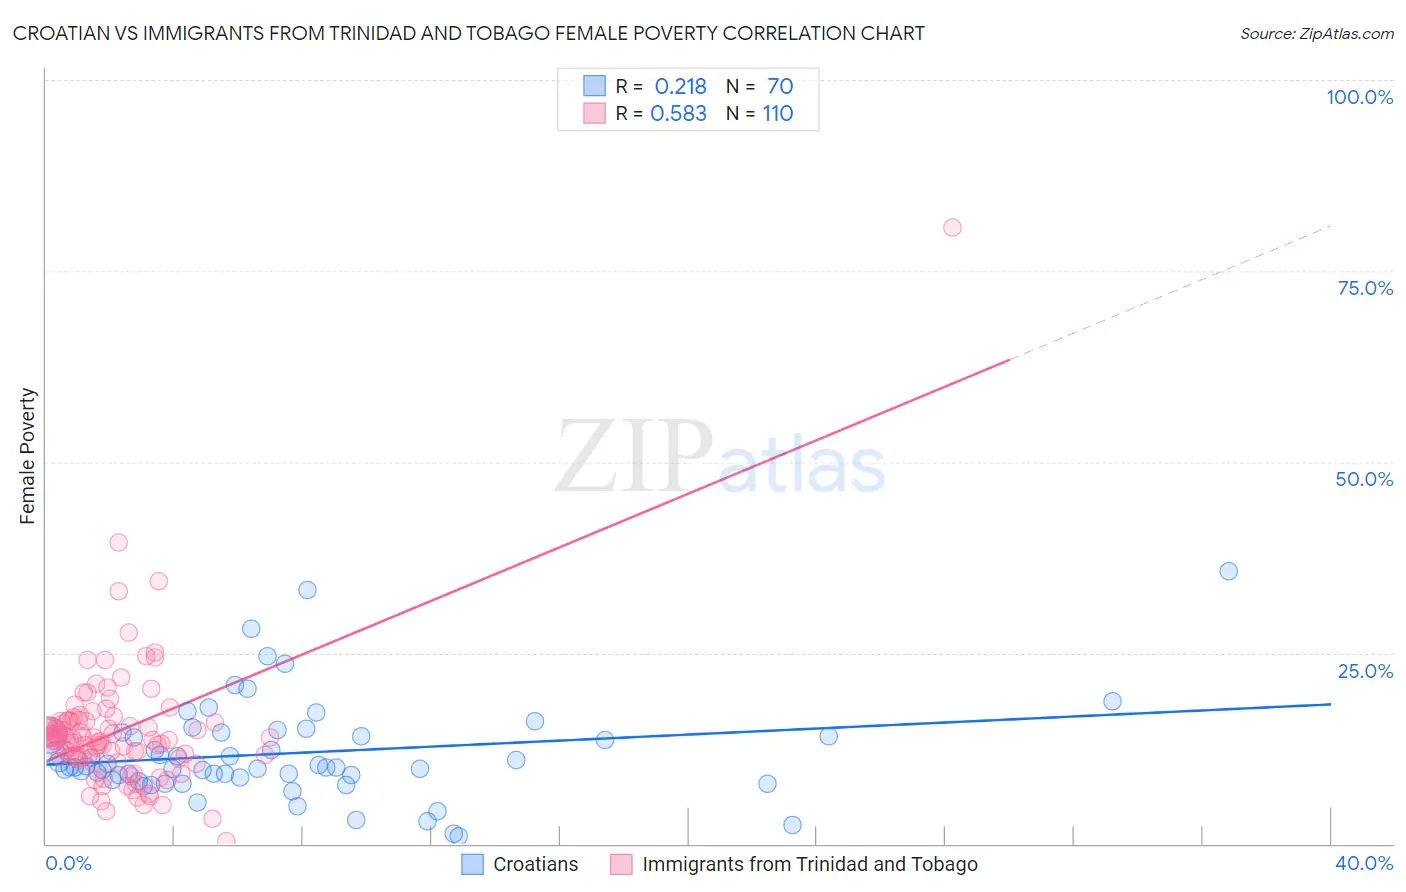 Croatian vs Immigrants from Trinidad and Tobago Female Poverty